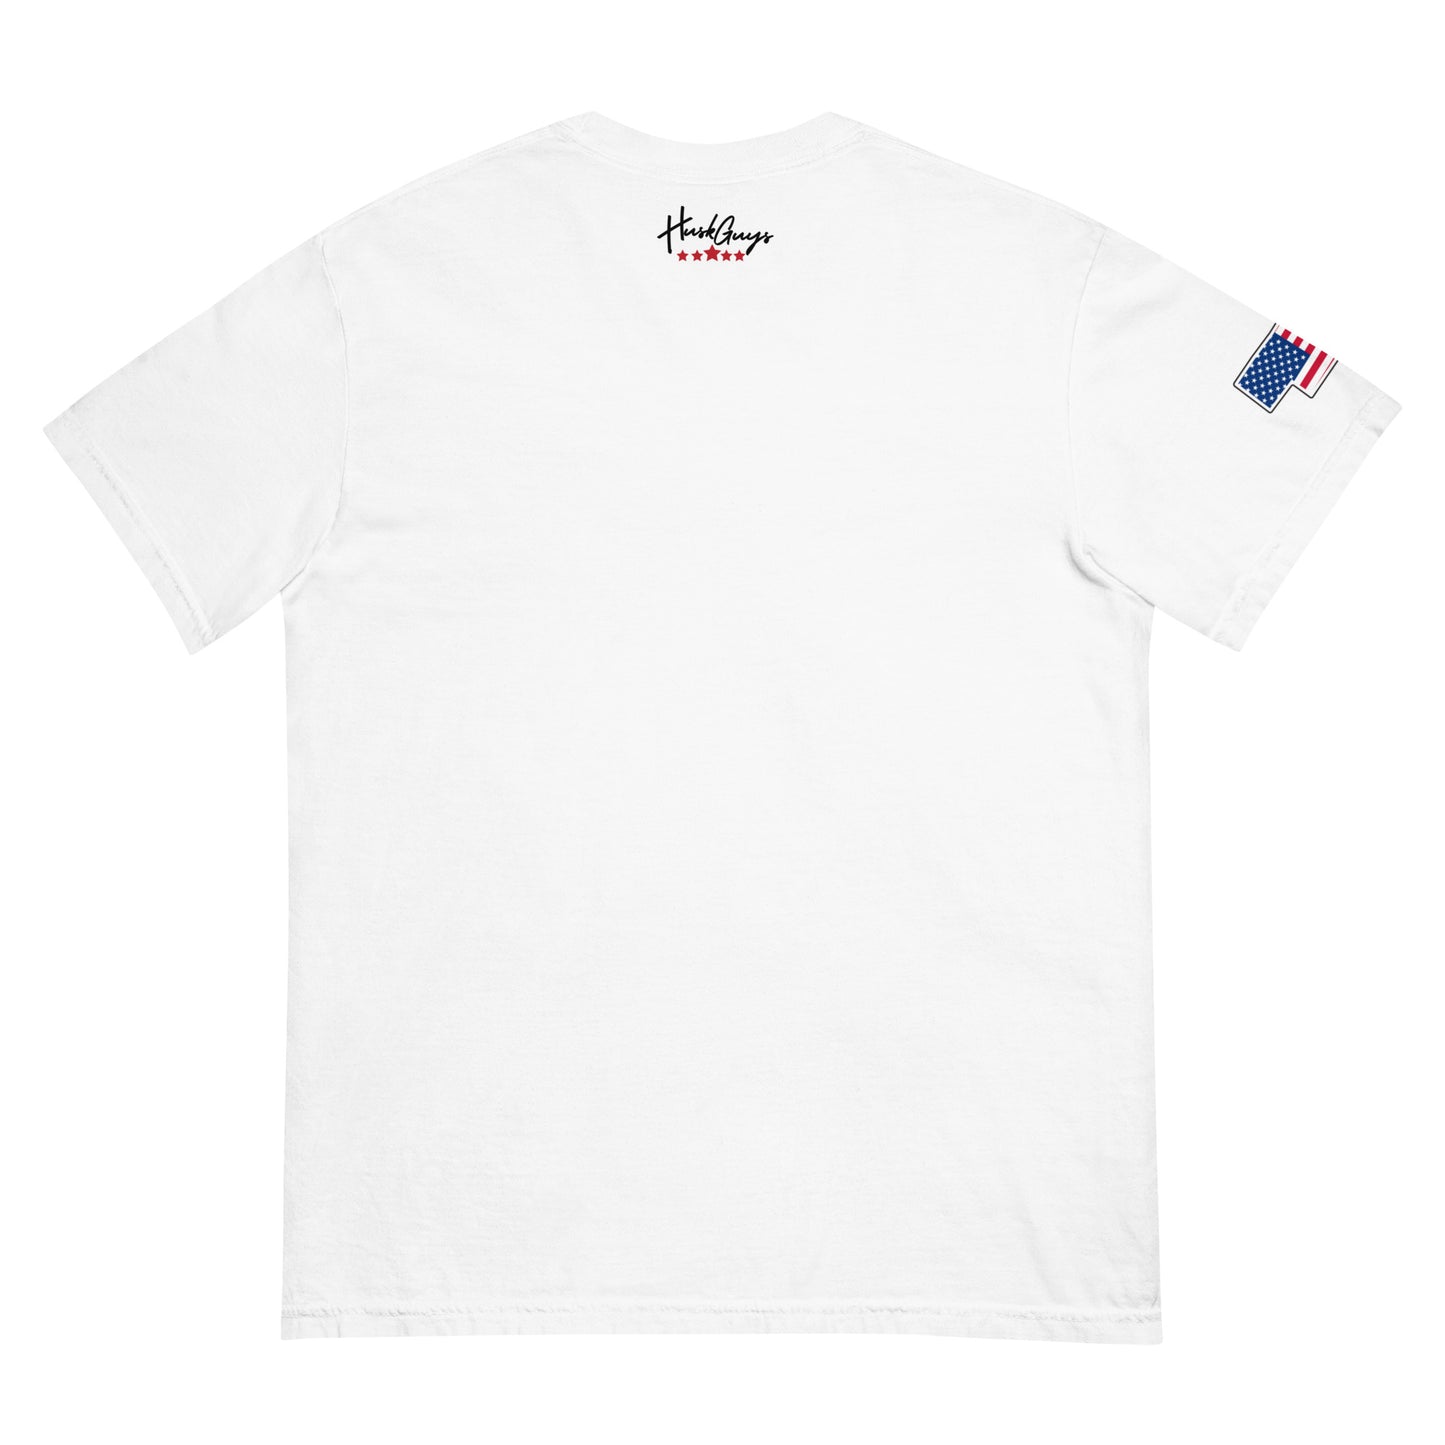 This Is The Year USA T-shirt